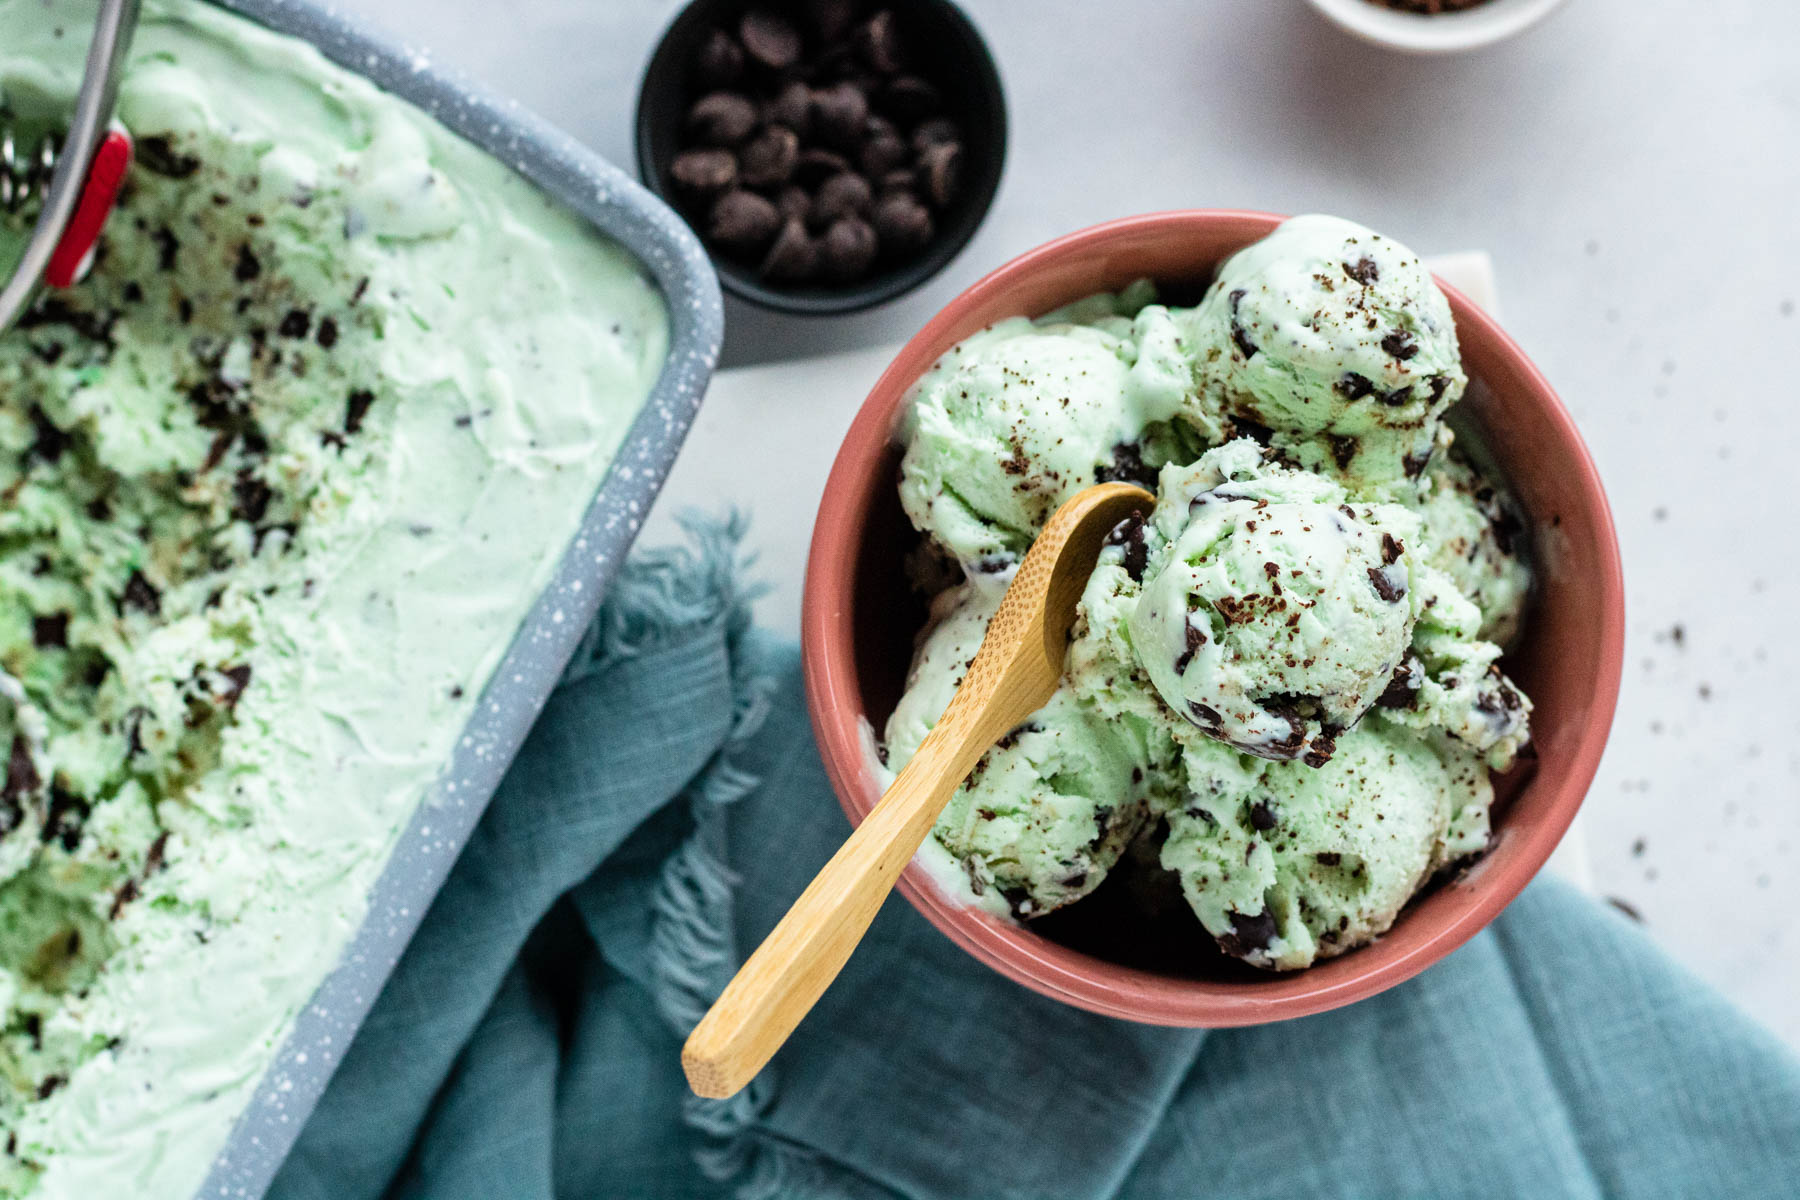 homemade no churn mint chocolate chip ice cream in a bowl